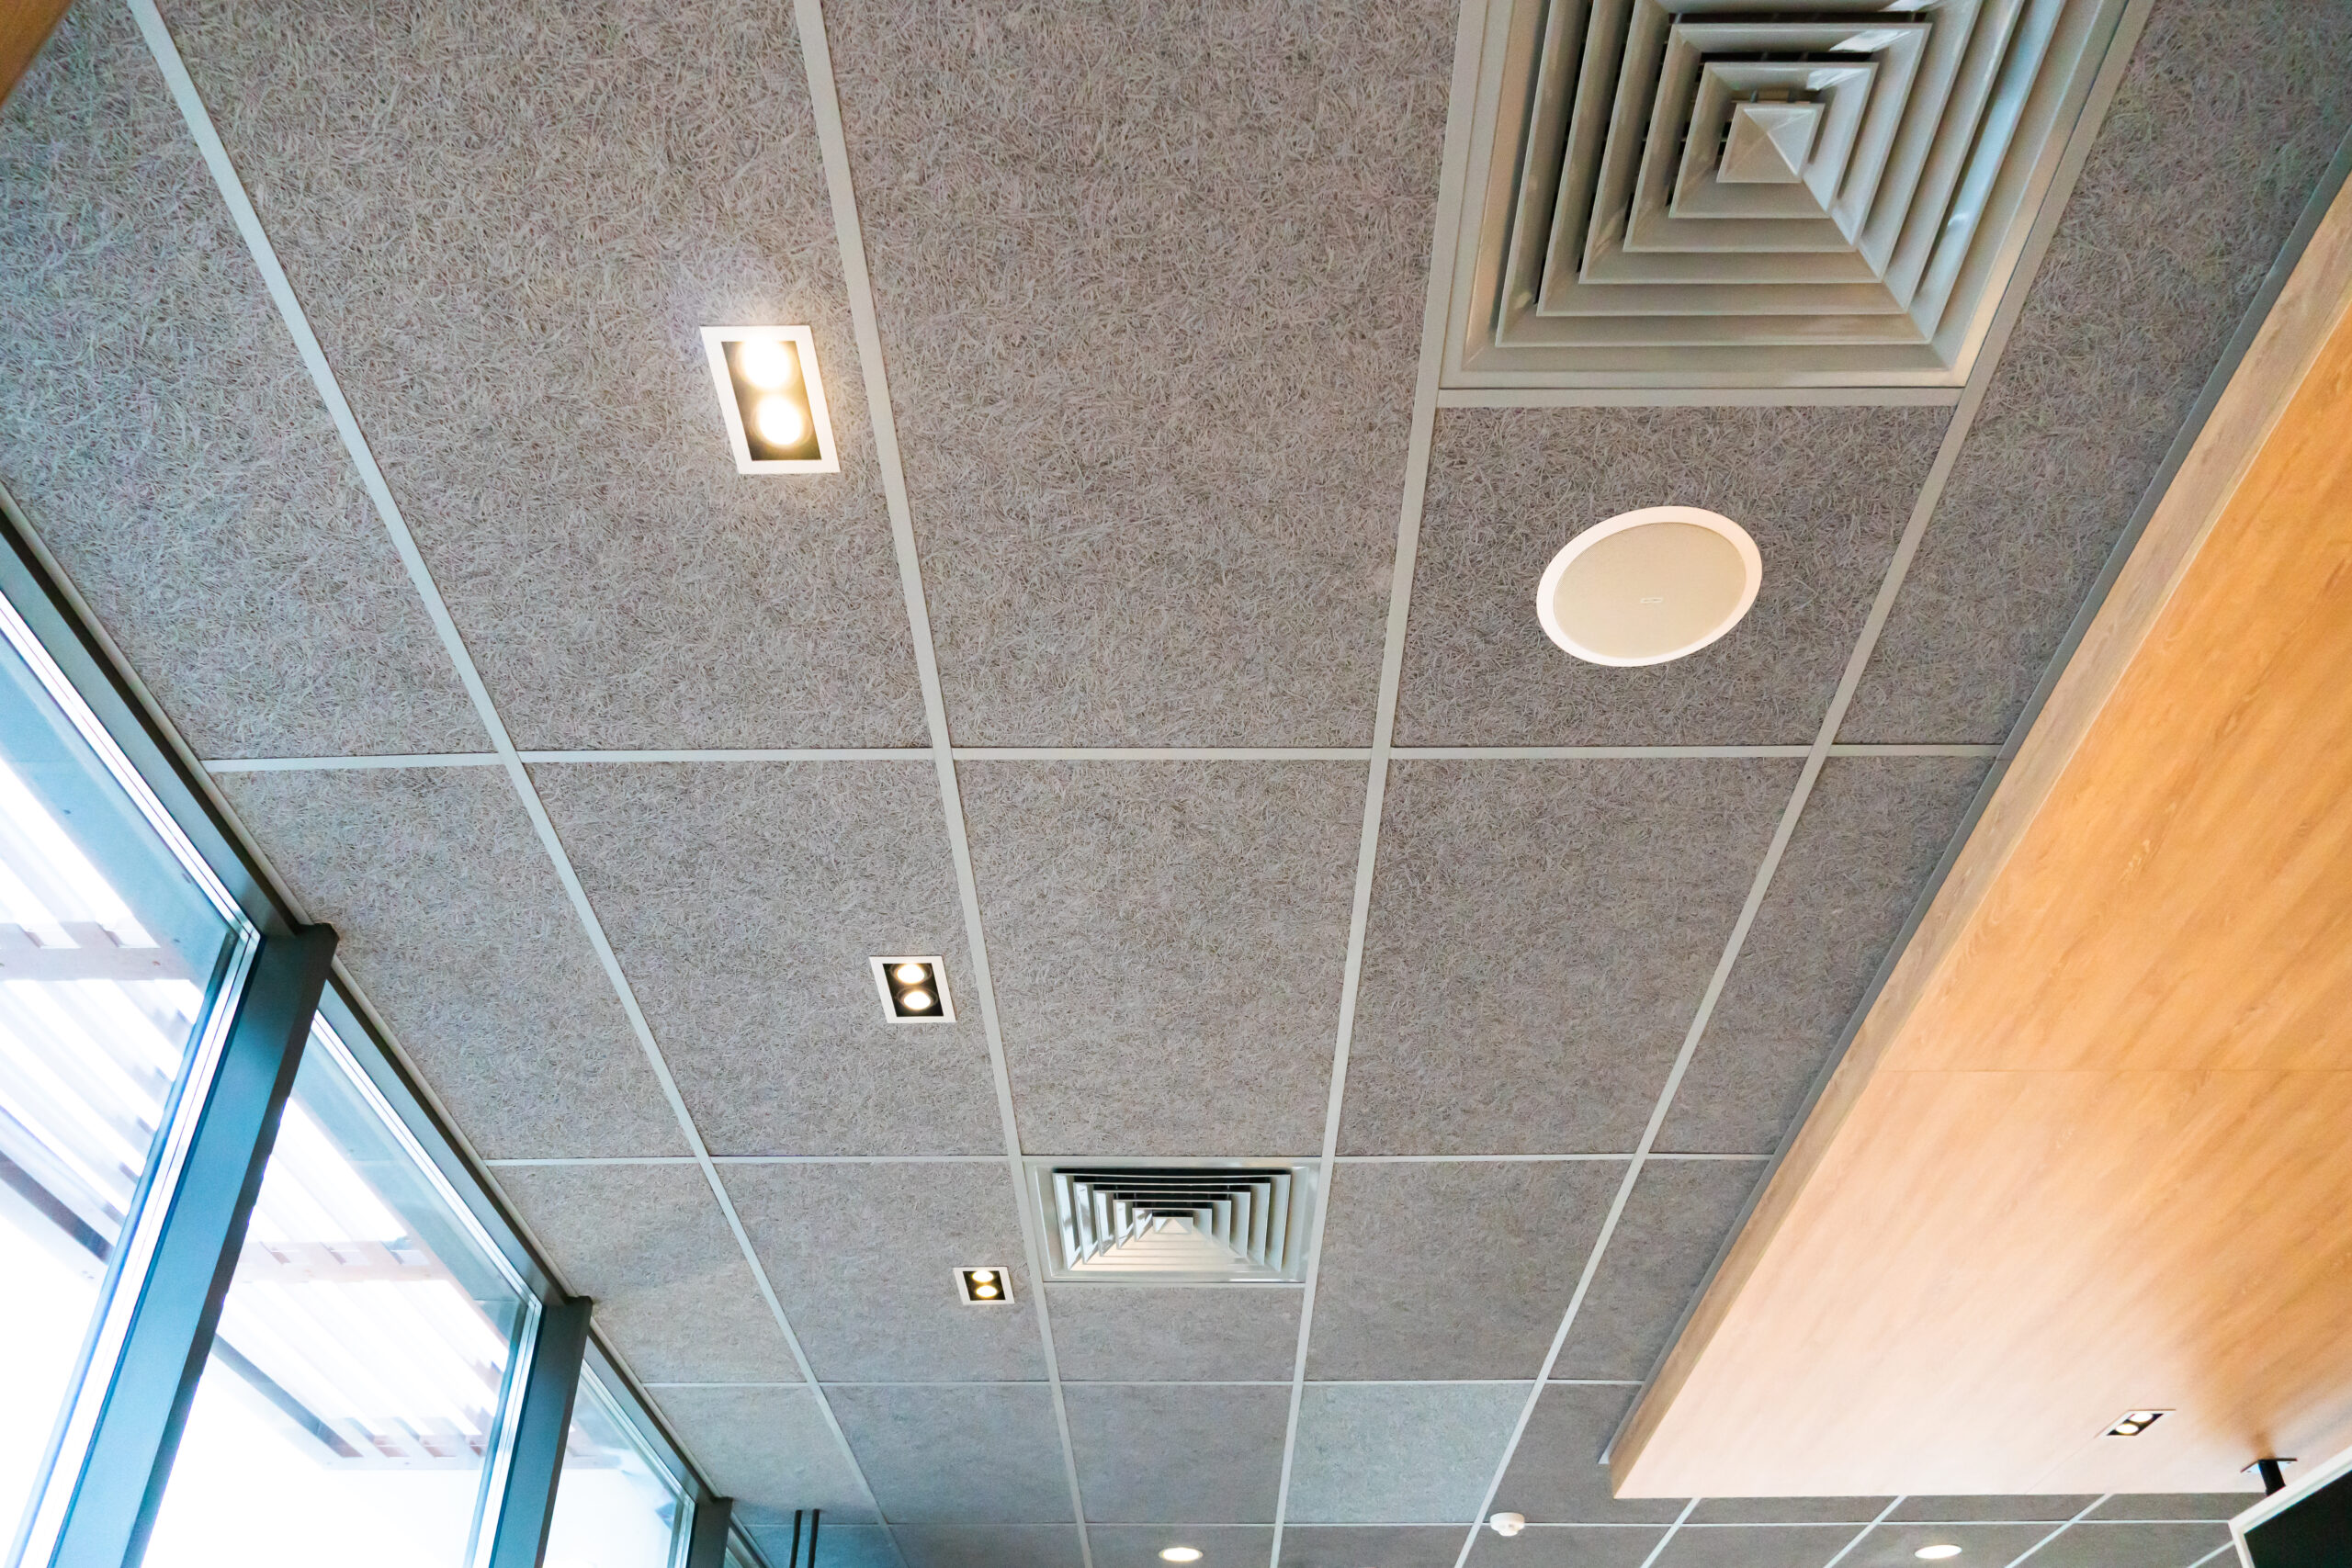 Suspended ceiling with ventilation holes and lamps. Interior design in a cafe or restaurant. Forced ventilation in a wall under the ceiling.